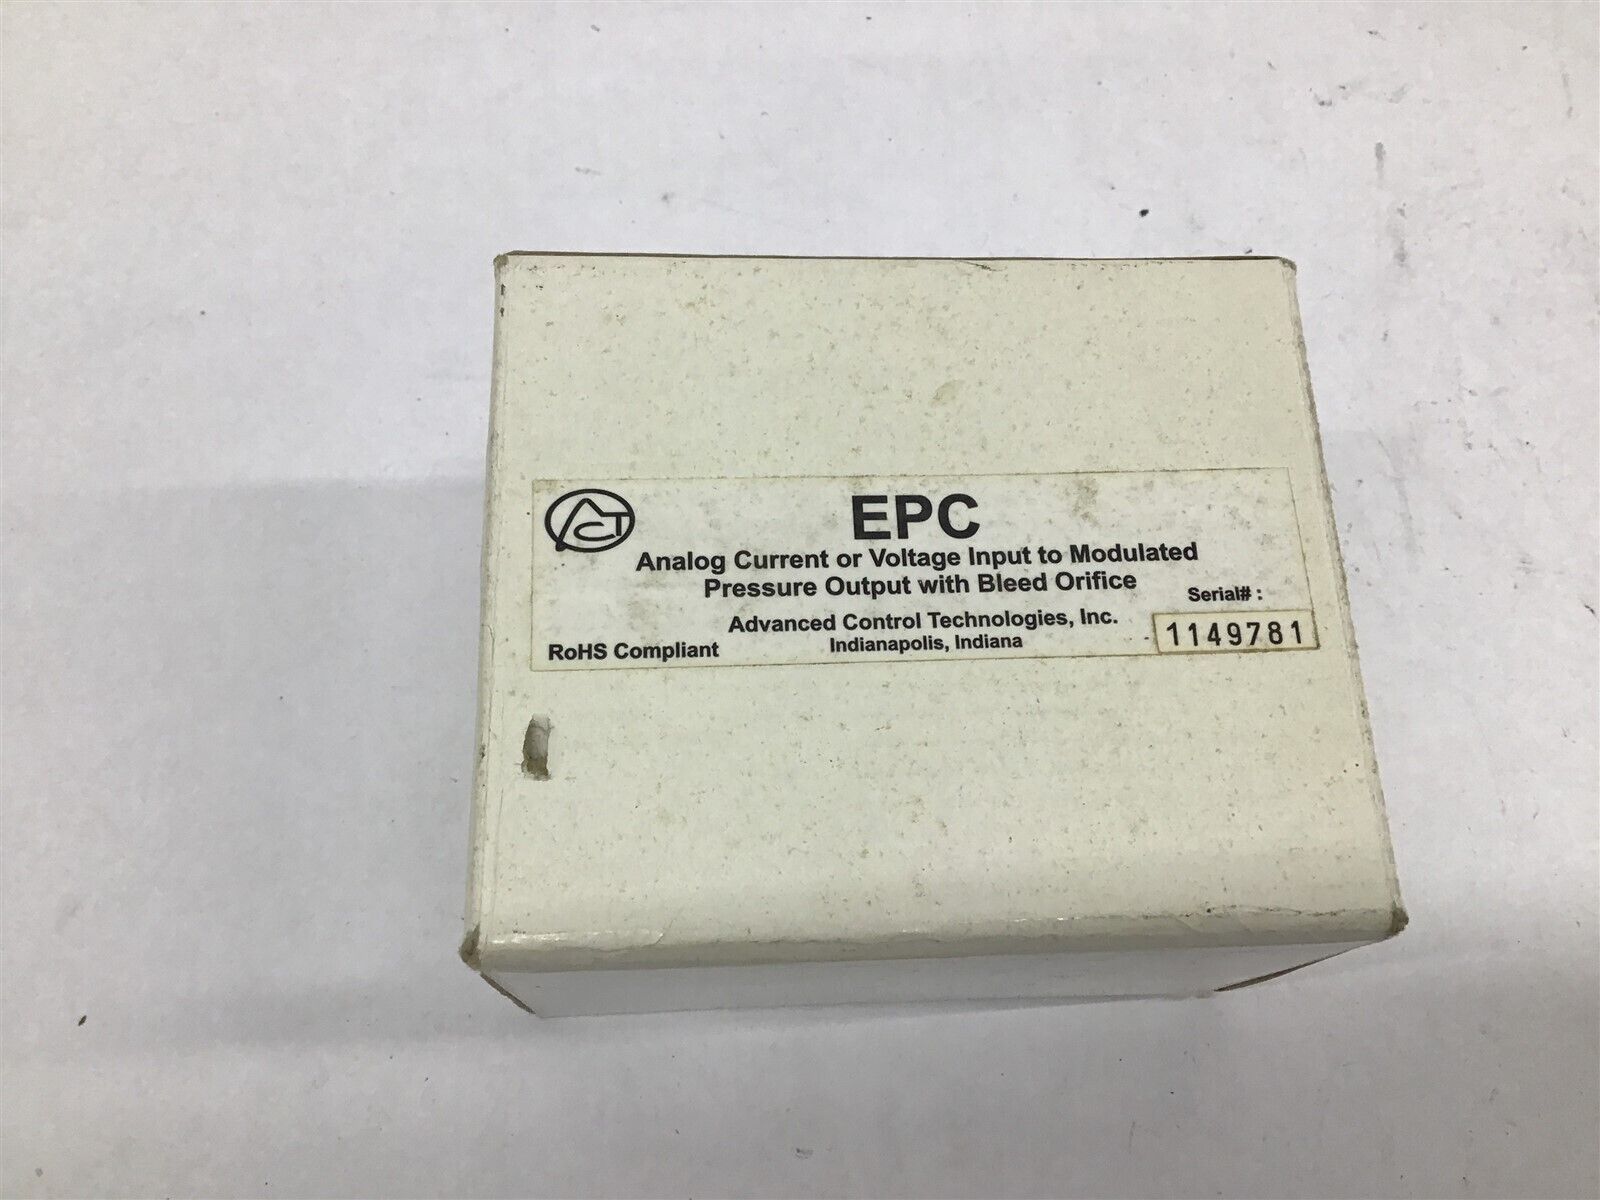 EPC Analog Current or Voltage Input 1149781